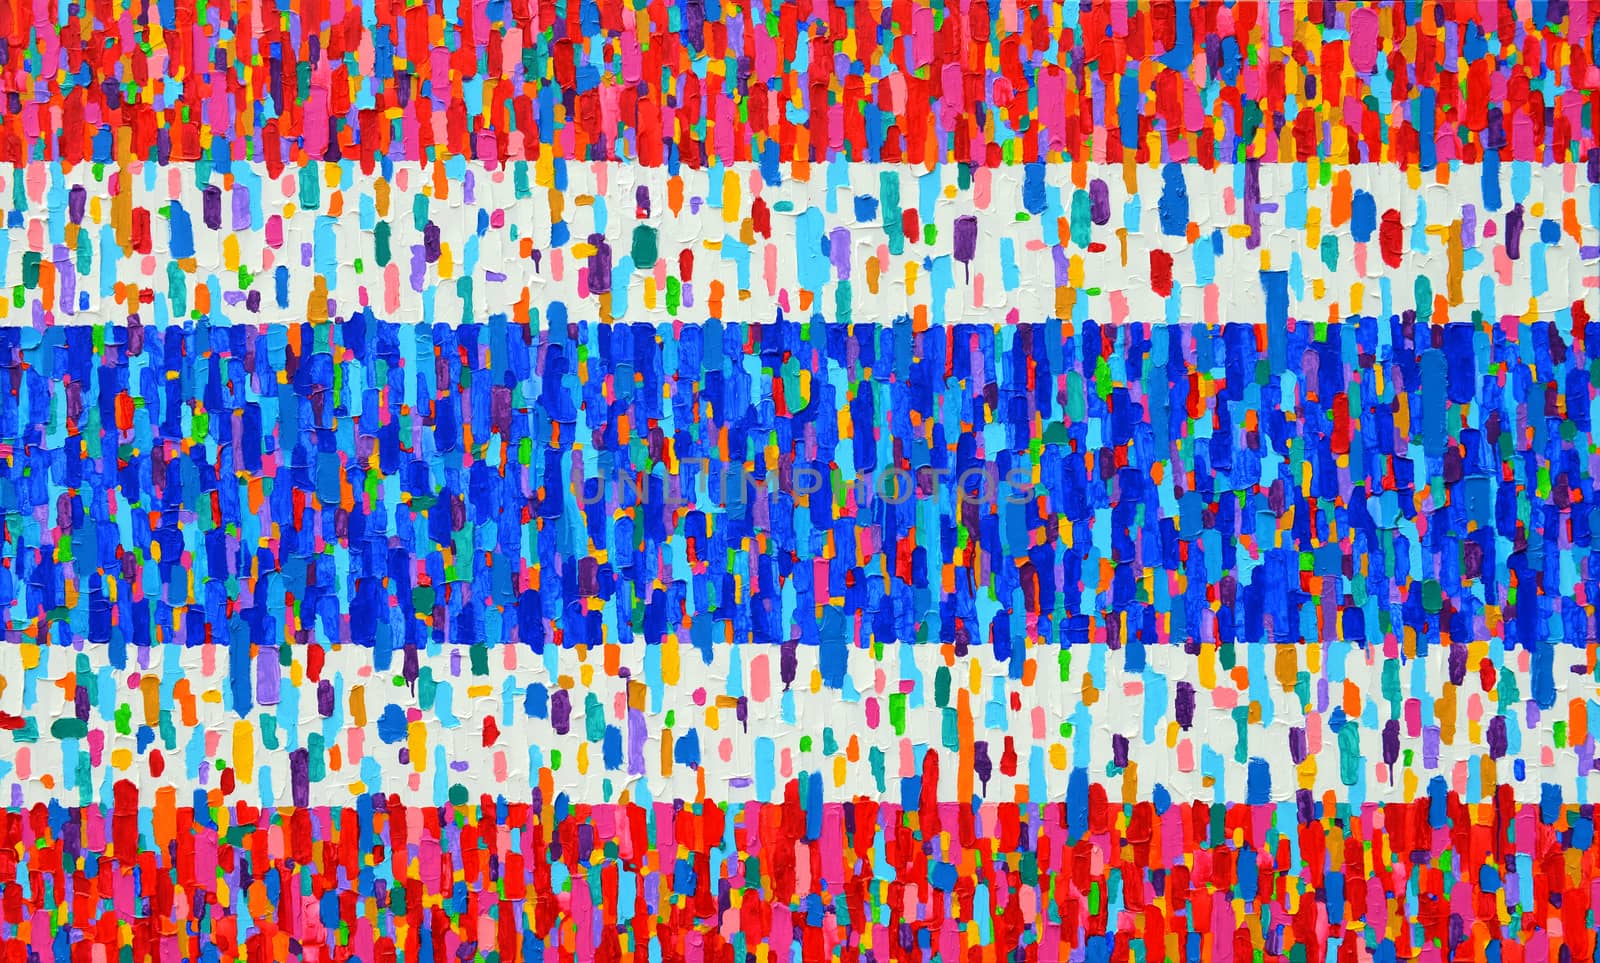 (Flag of Thailand) Texture, background and Colorful Image of an  by opasstudio